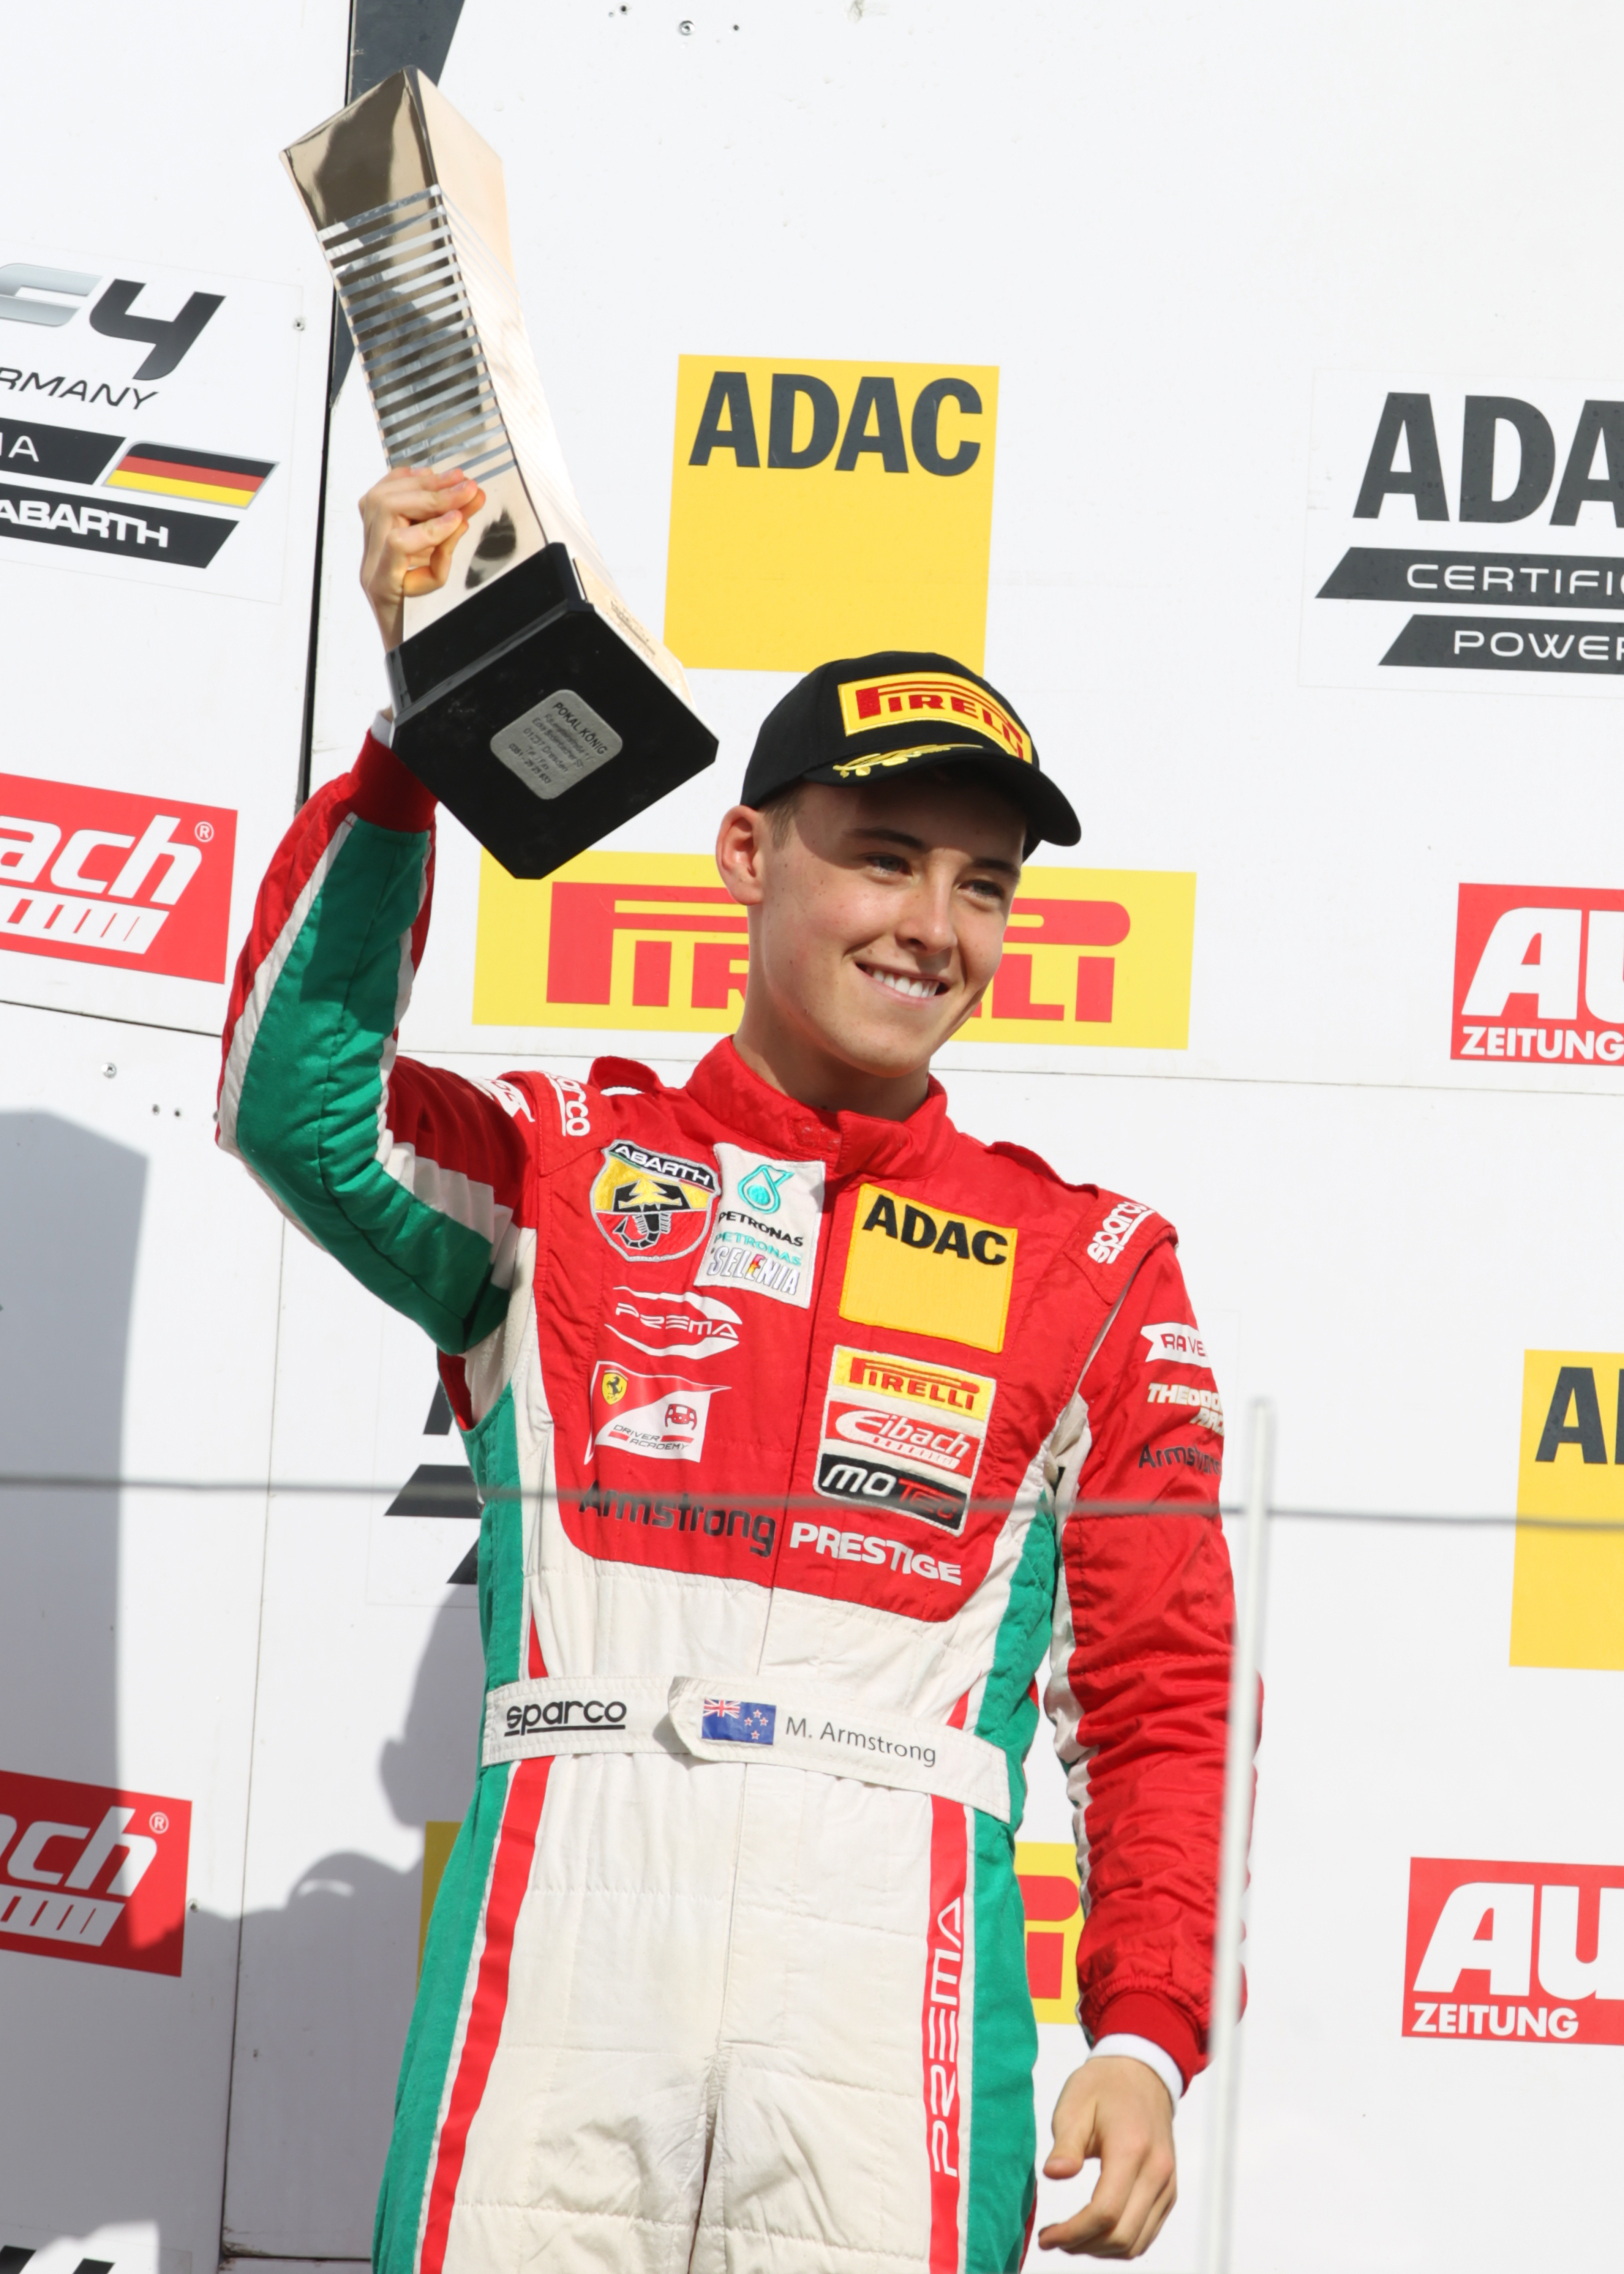 Armstrong dominates two European Formula 4 championships